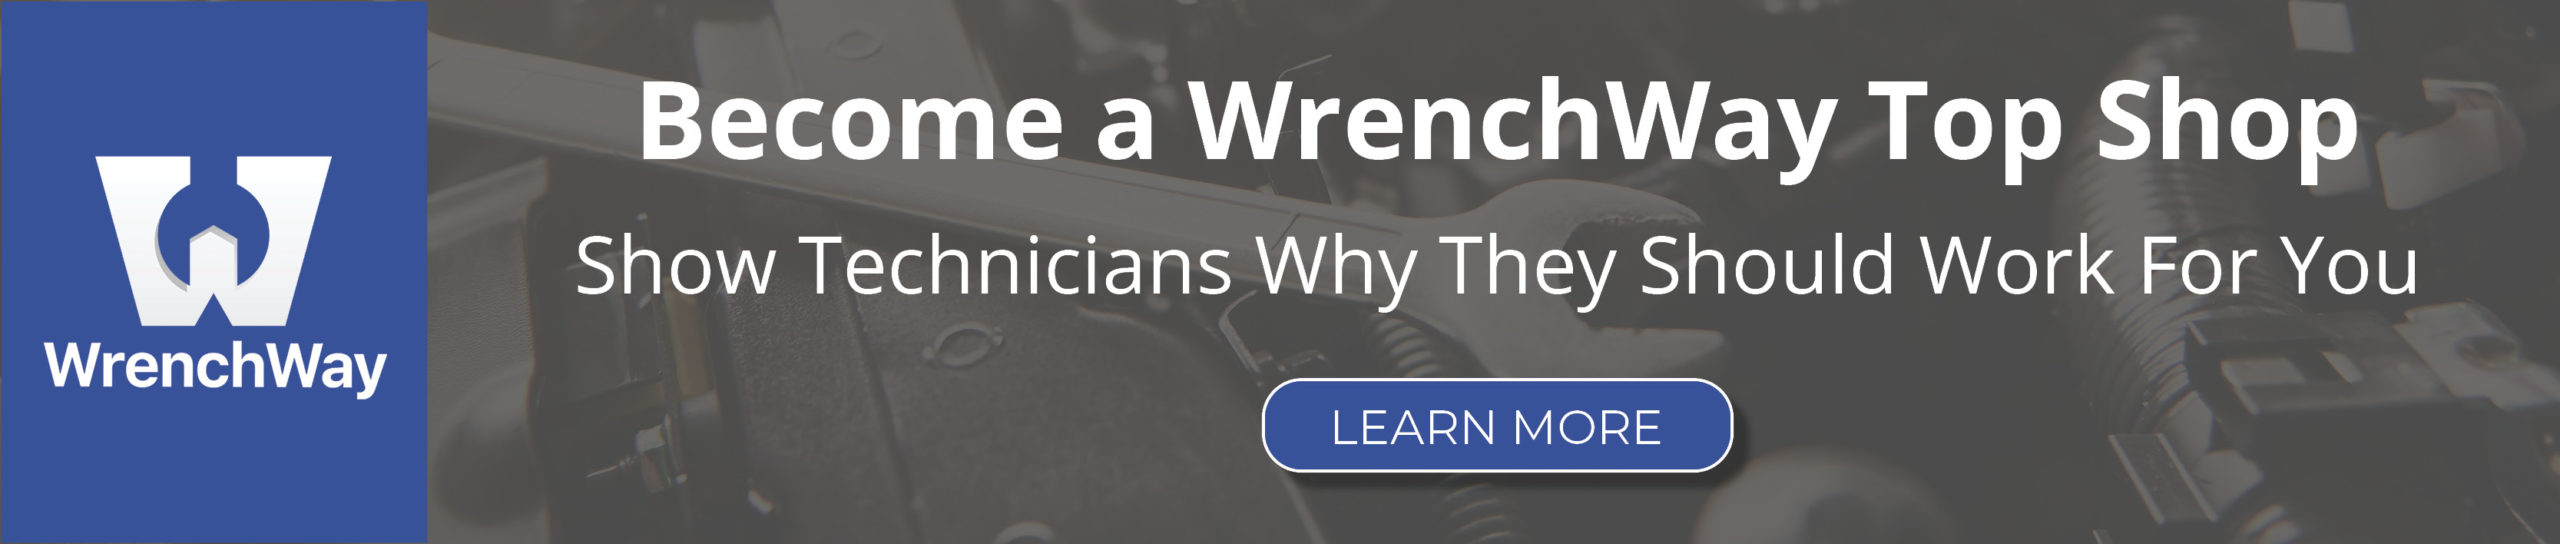 Become a WrenchWay Top Shop to show technicians why they should work for your shop or dealership